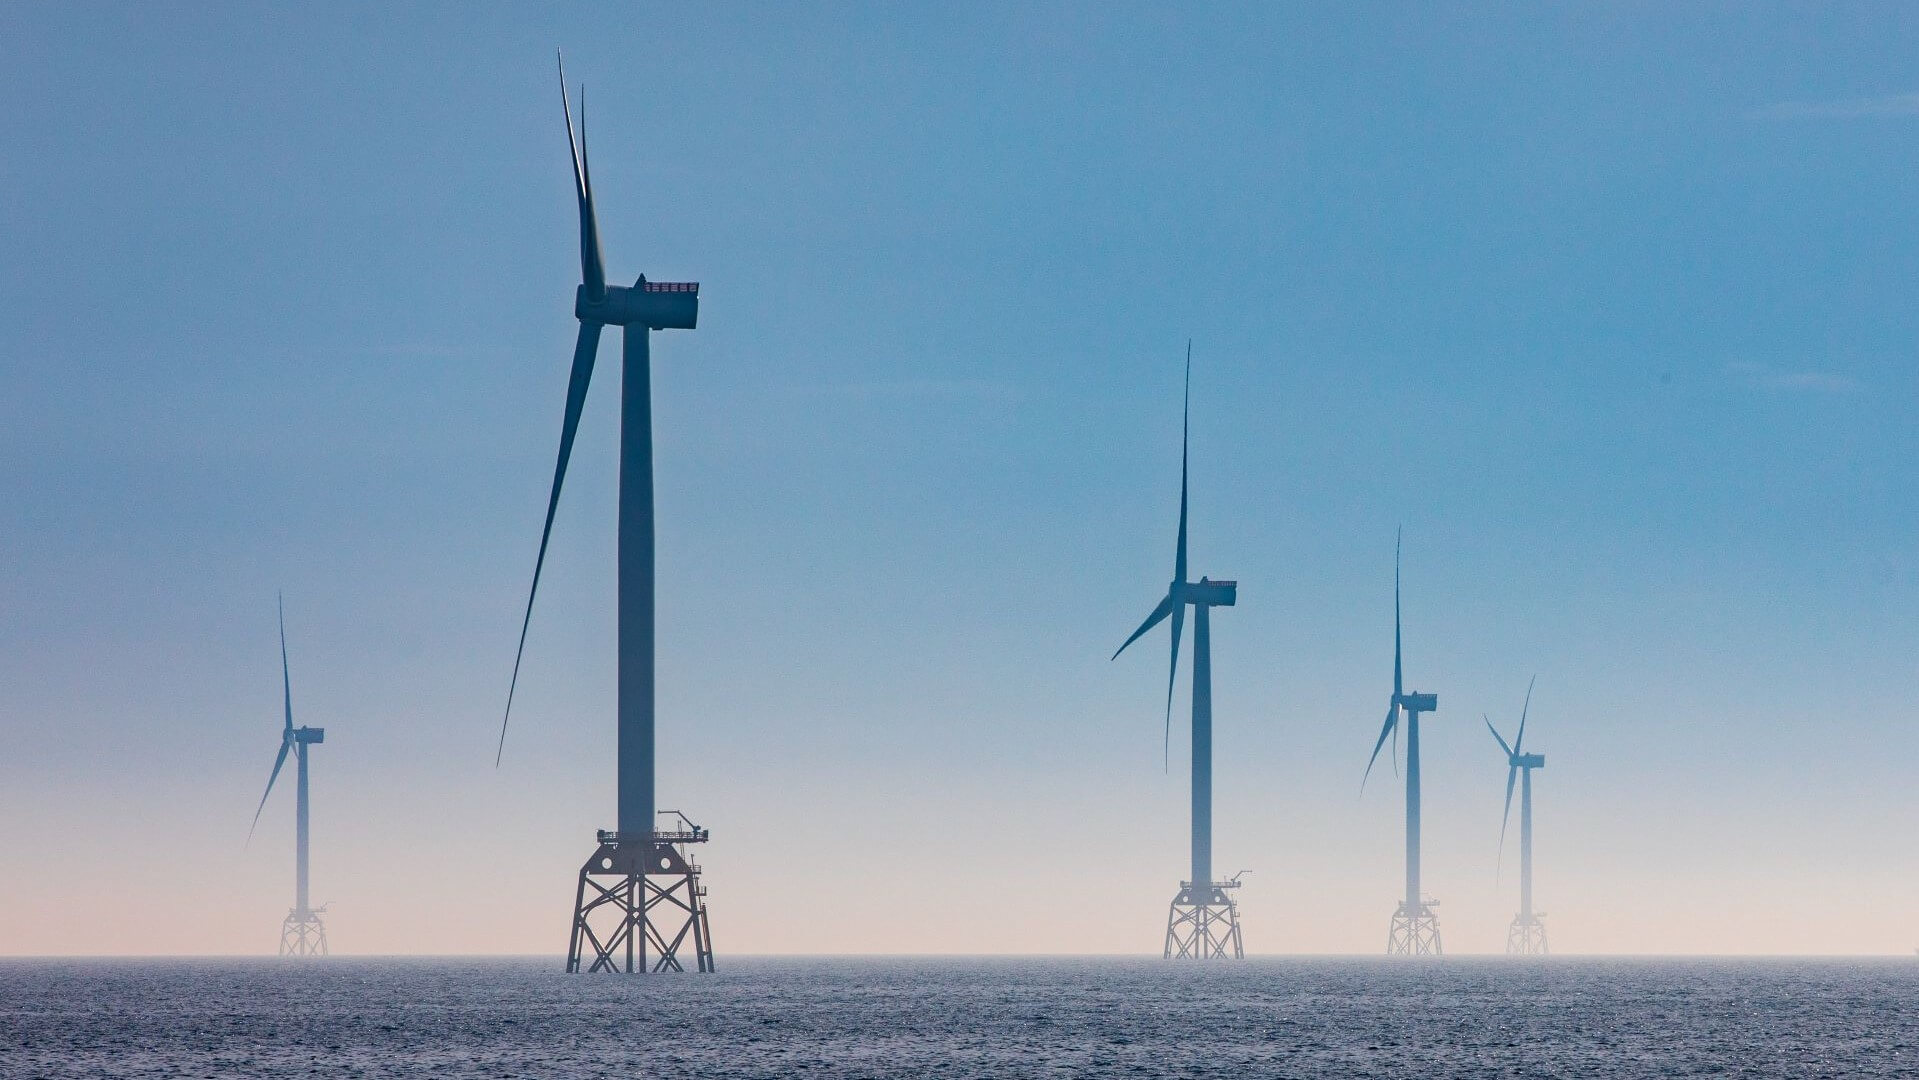 Offshore wind farm in blue sea with blue sky above